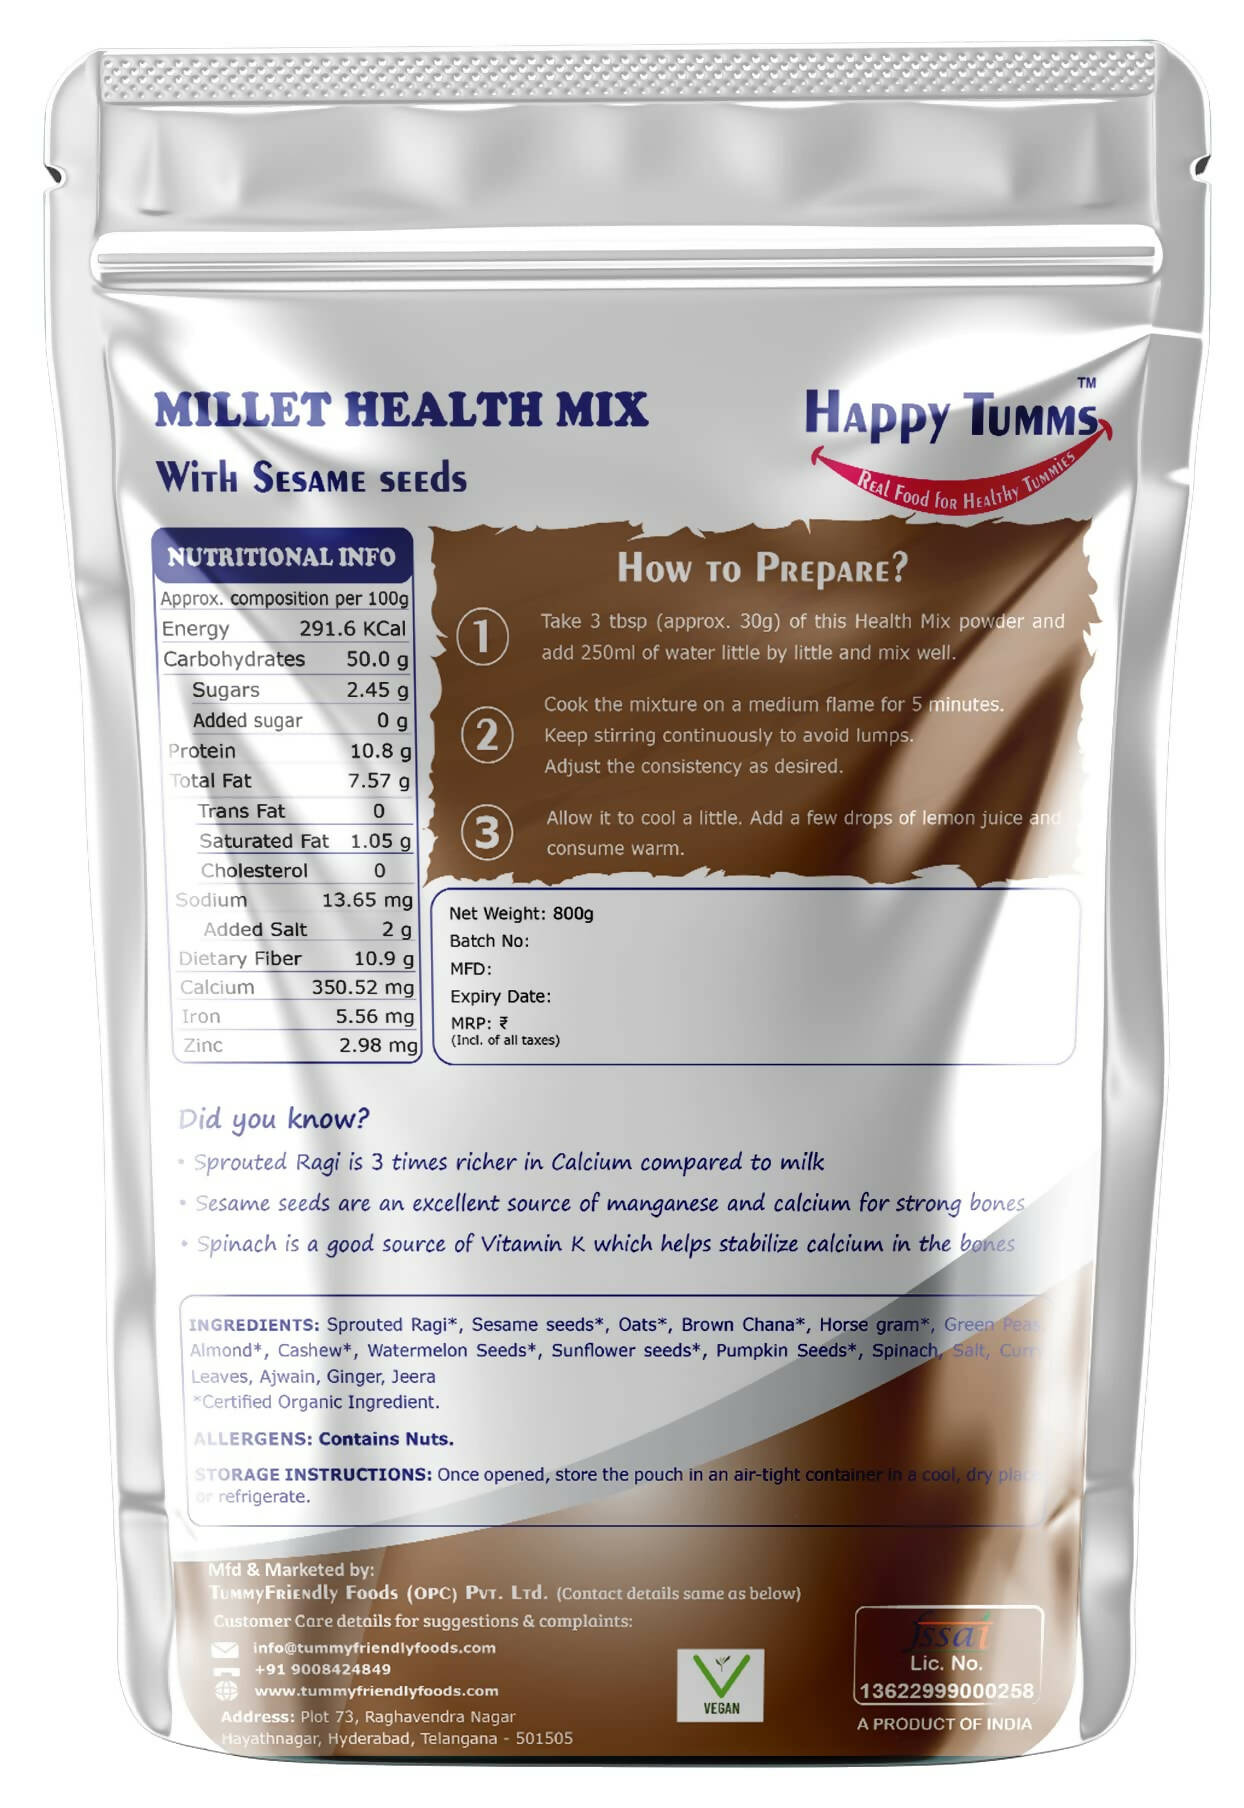 TummyFriendly Foods Organic Millet Health Mix With Sesame Seeds and Curry Leaves